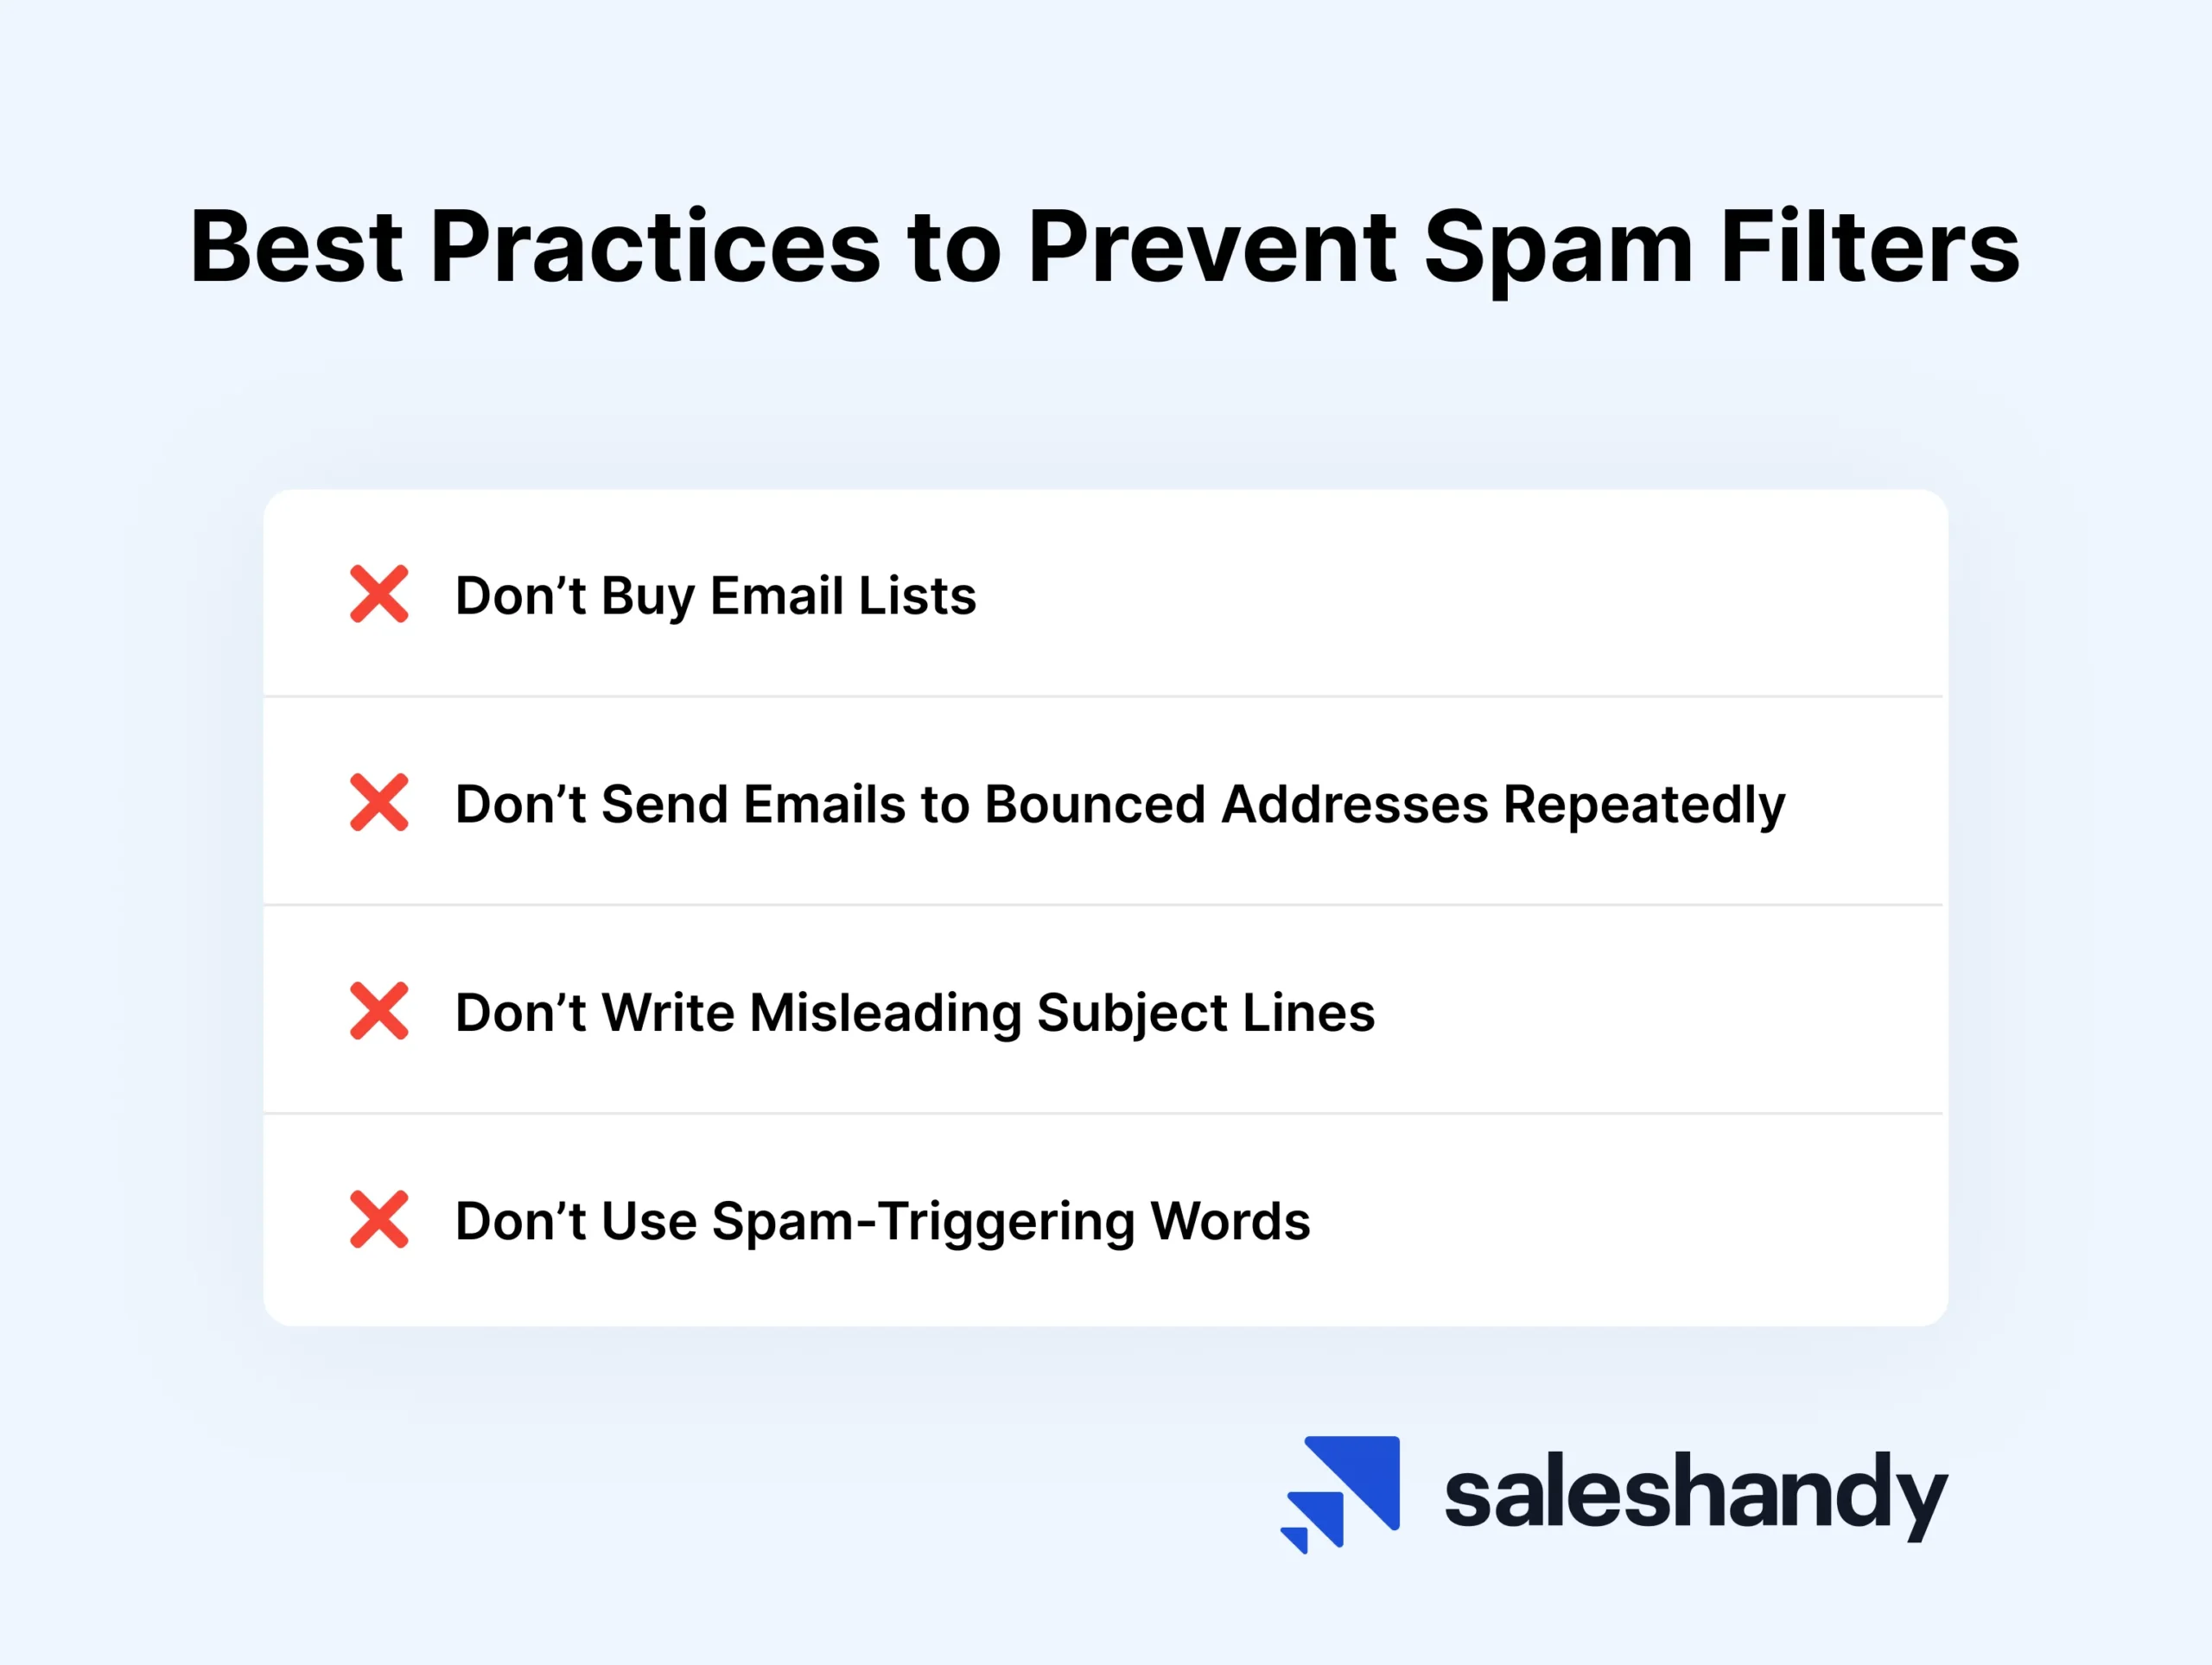 Best practices to prevent spam filter